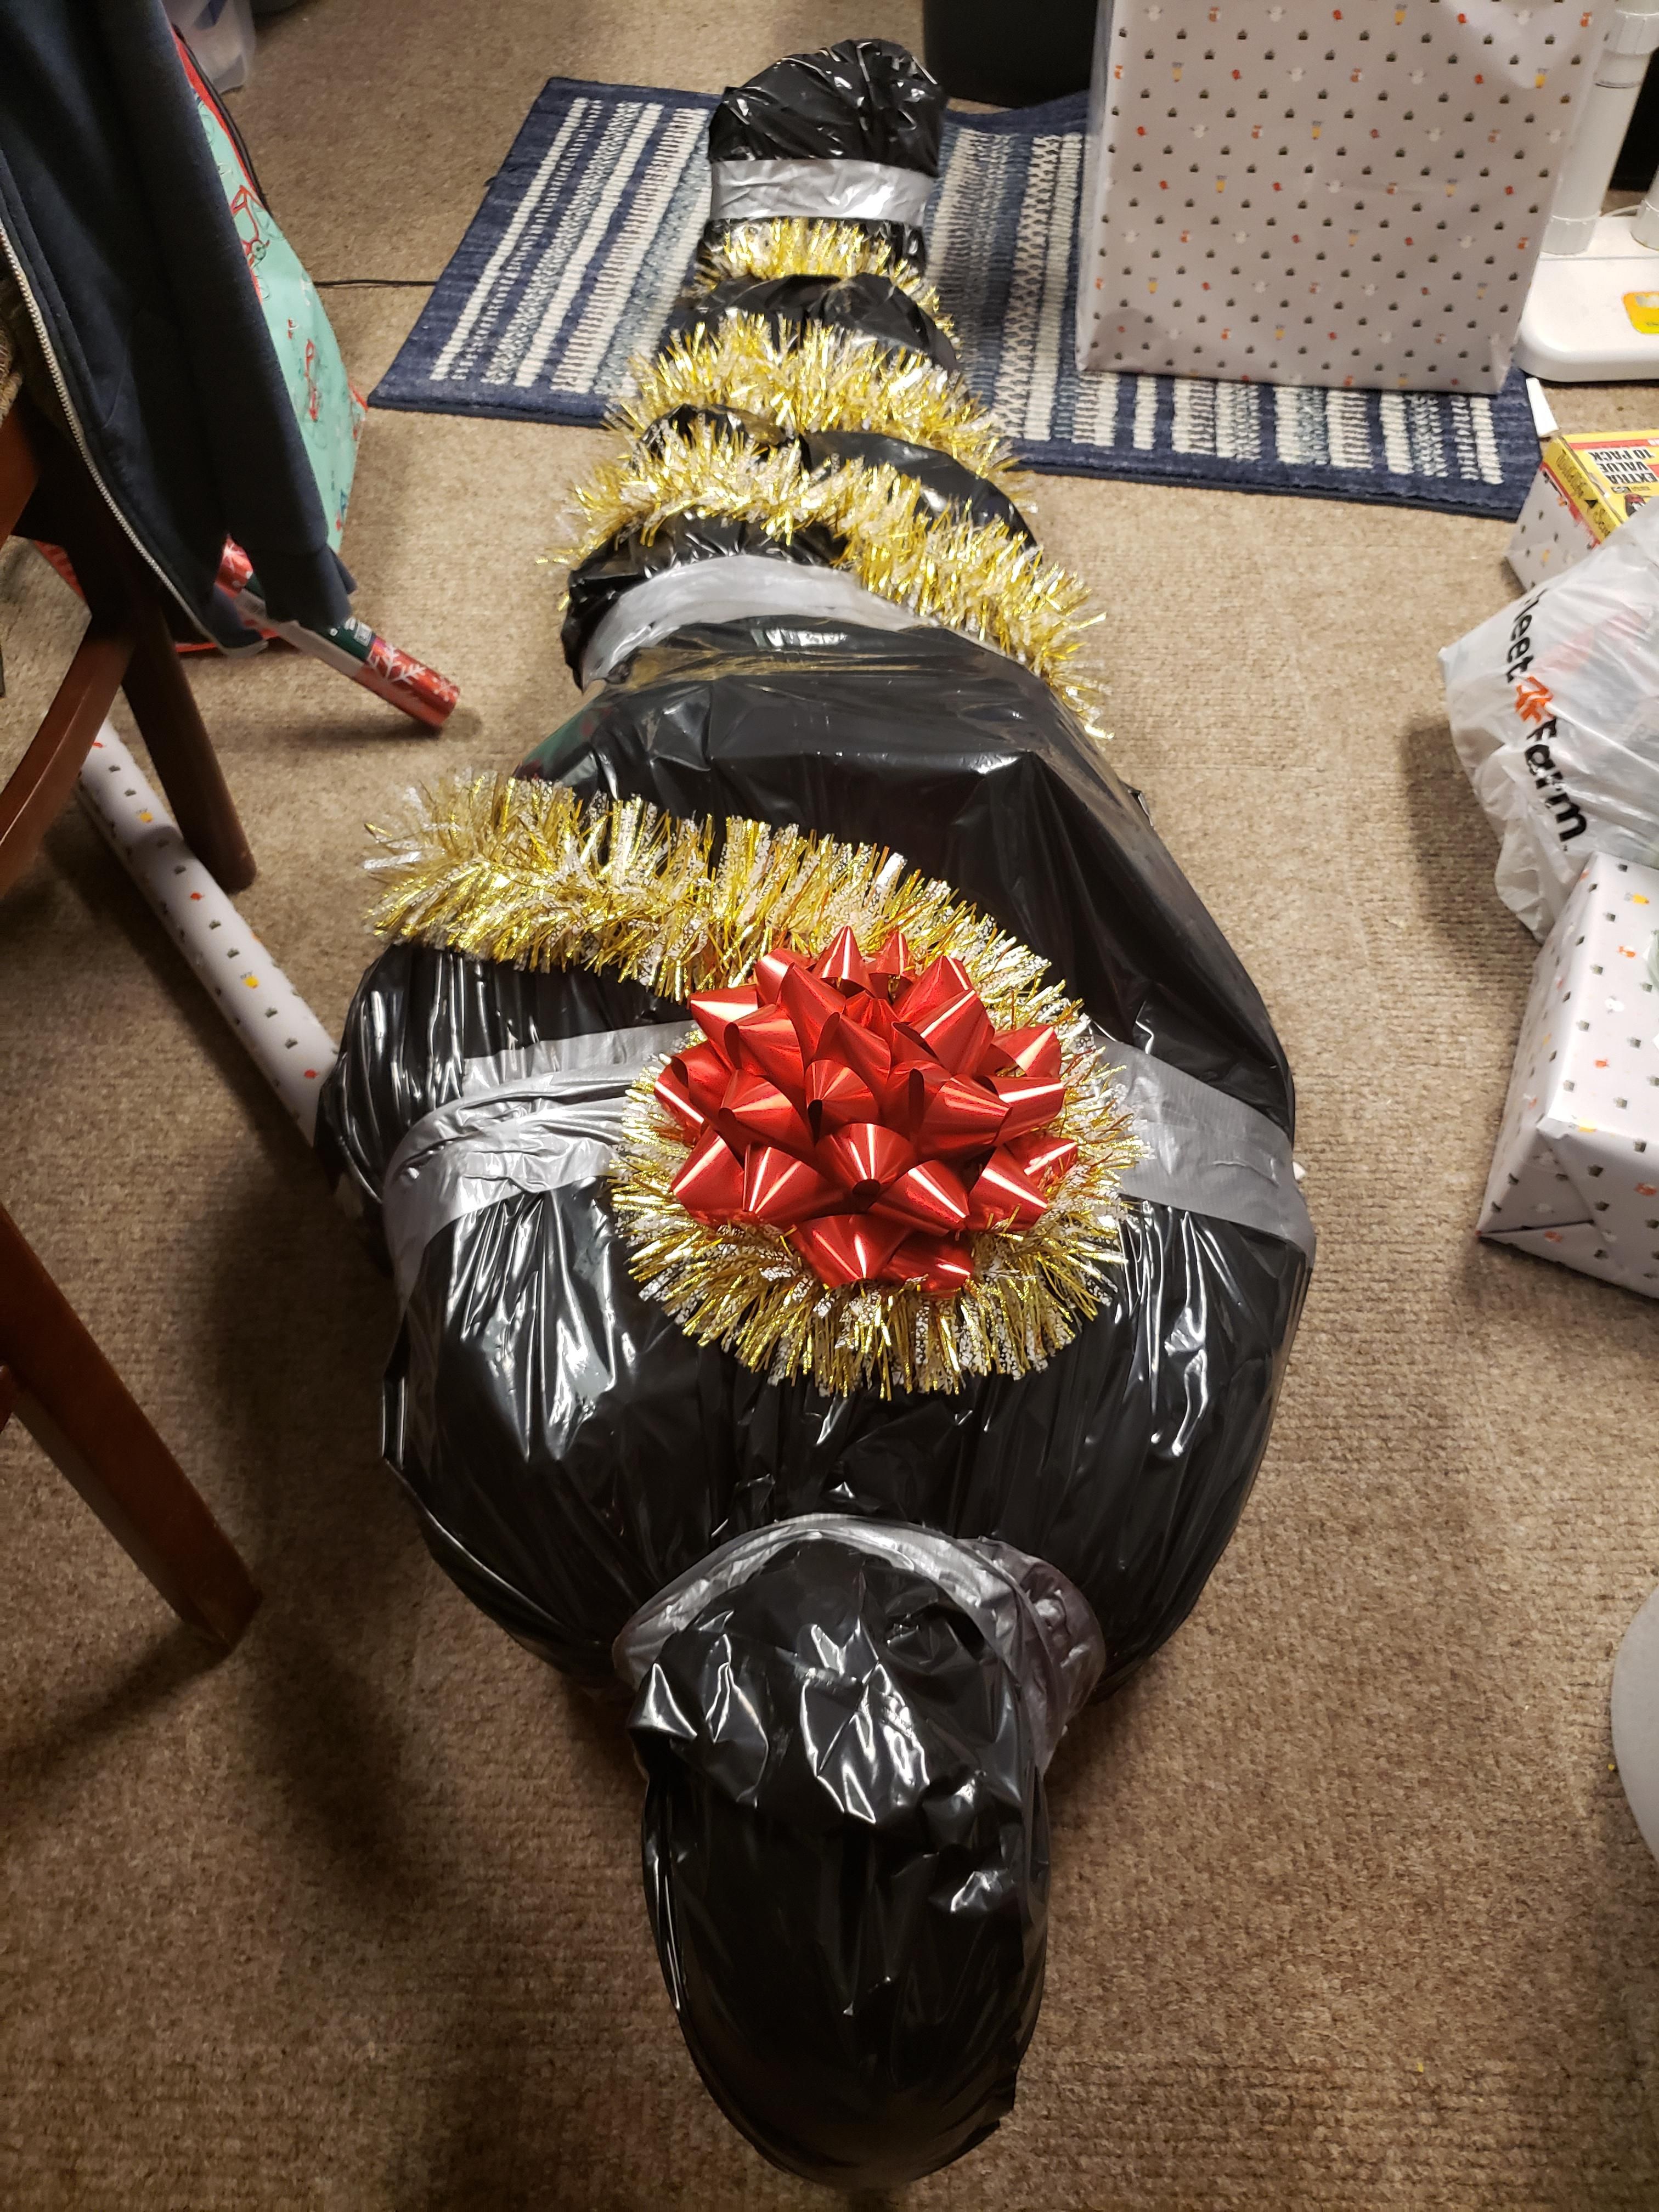 I took some creative liberties when wrapping my brother's Christmas gift.